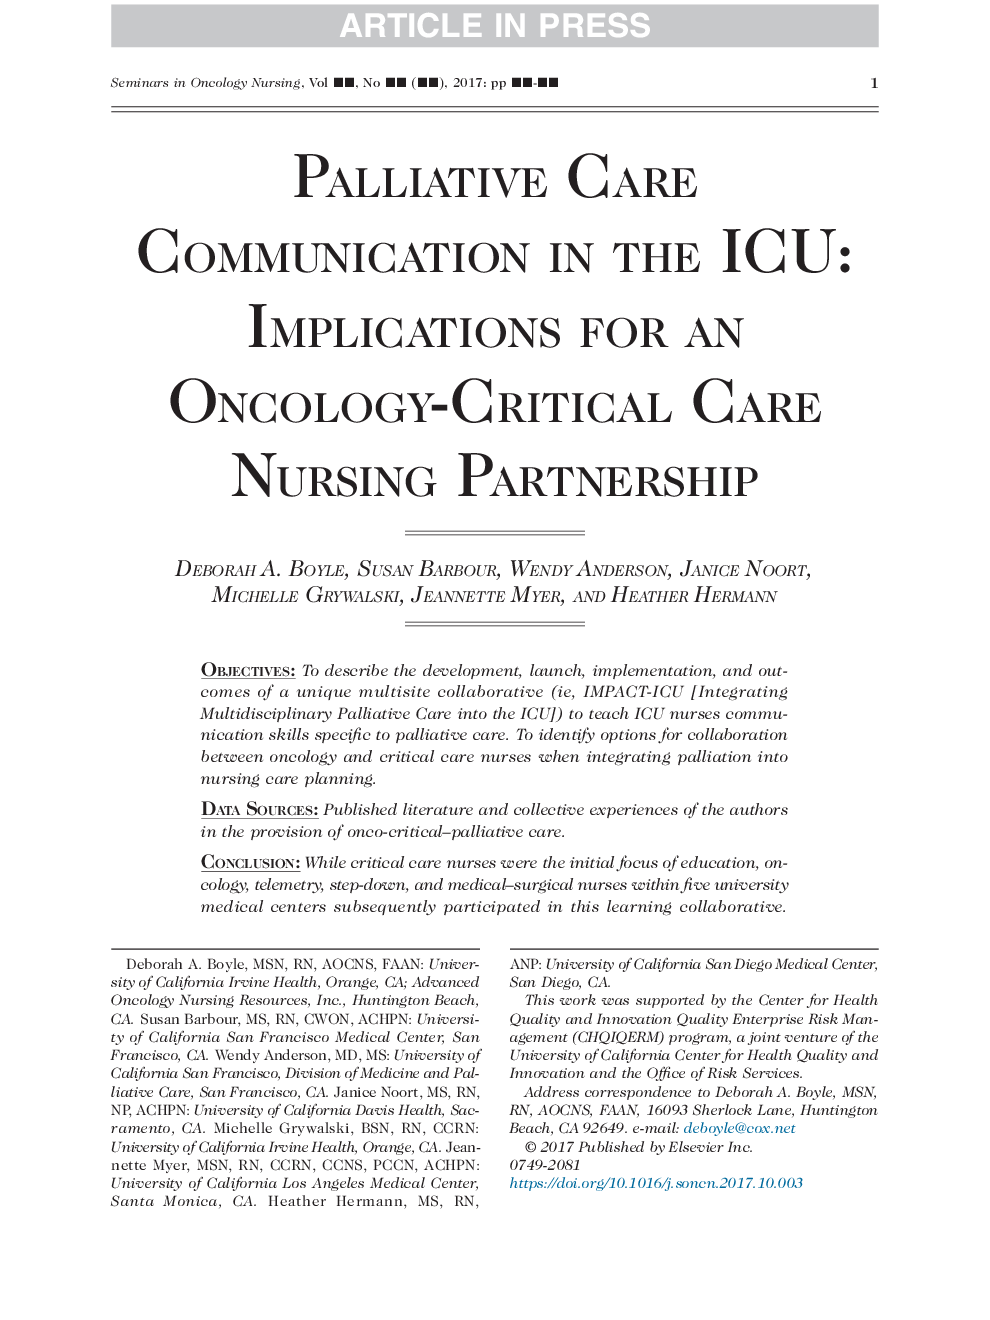 Palliative Care Communication in the ICU: Implications for an Oncology-Critical Care Nursing Partnership